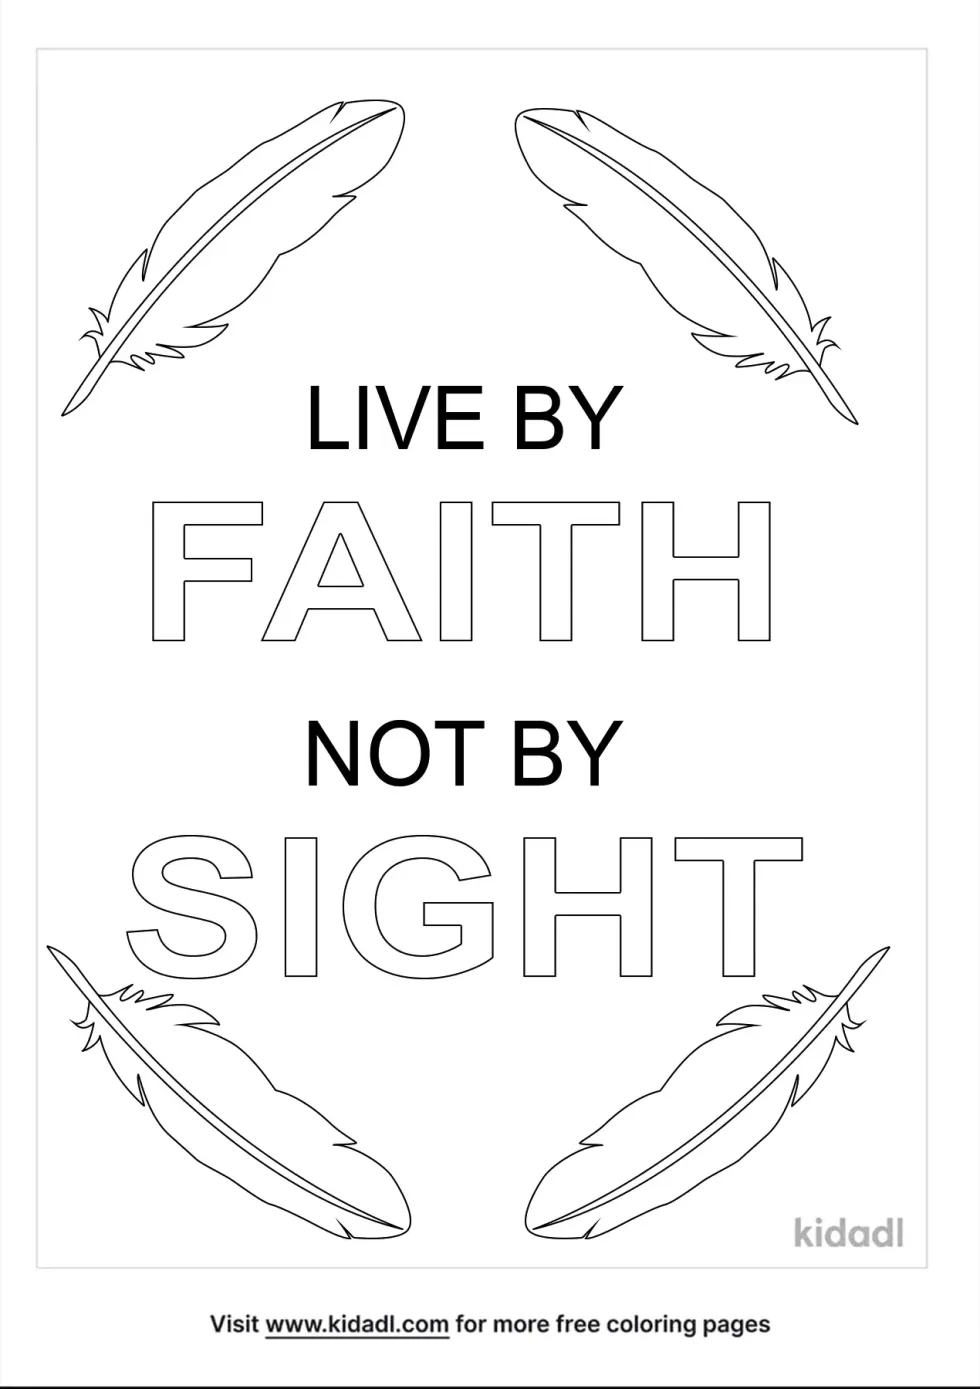 Live By Faith, Not By Sight Coloring Page